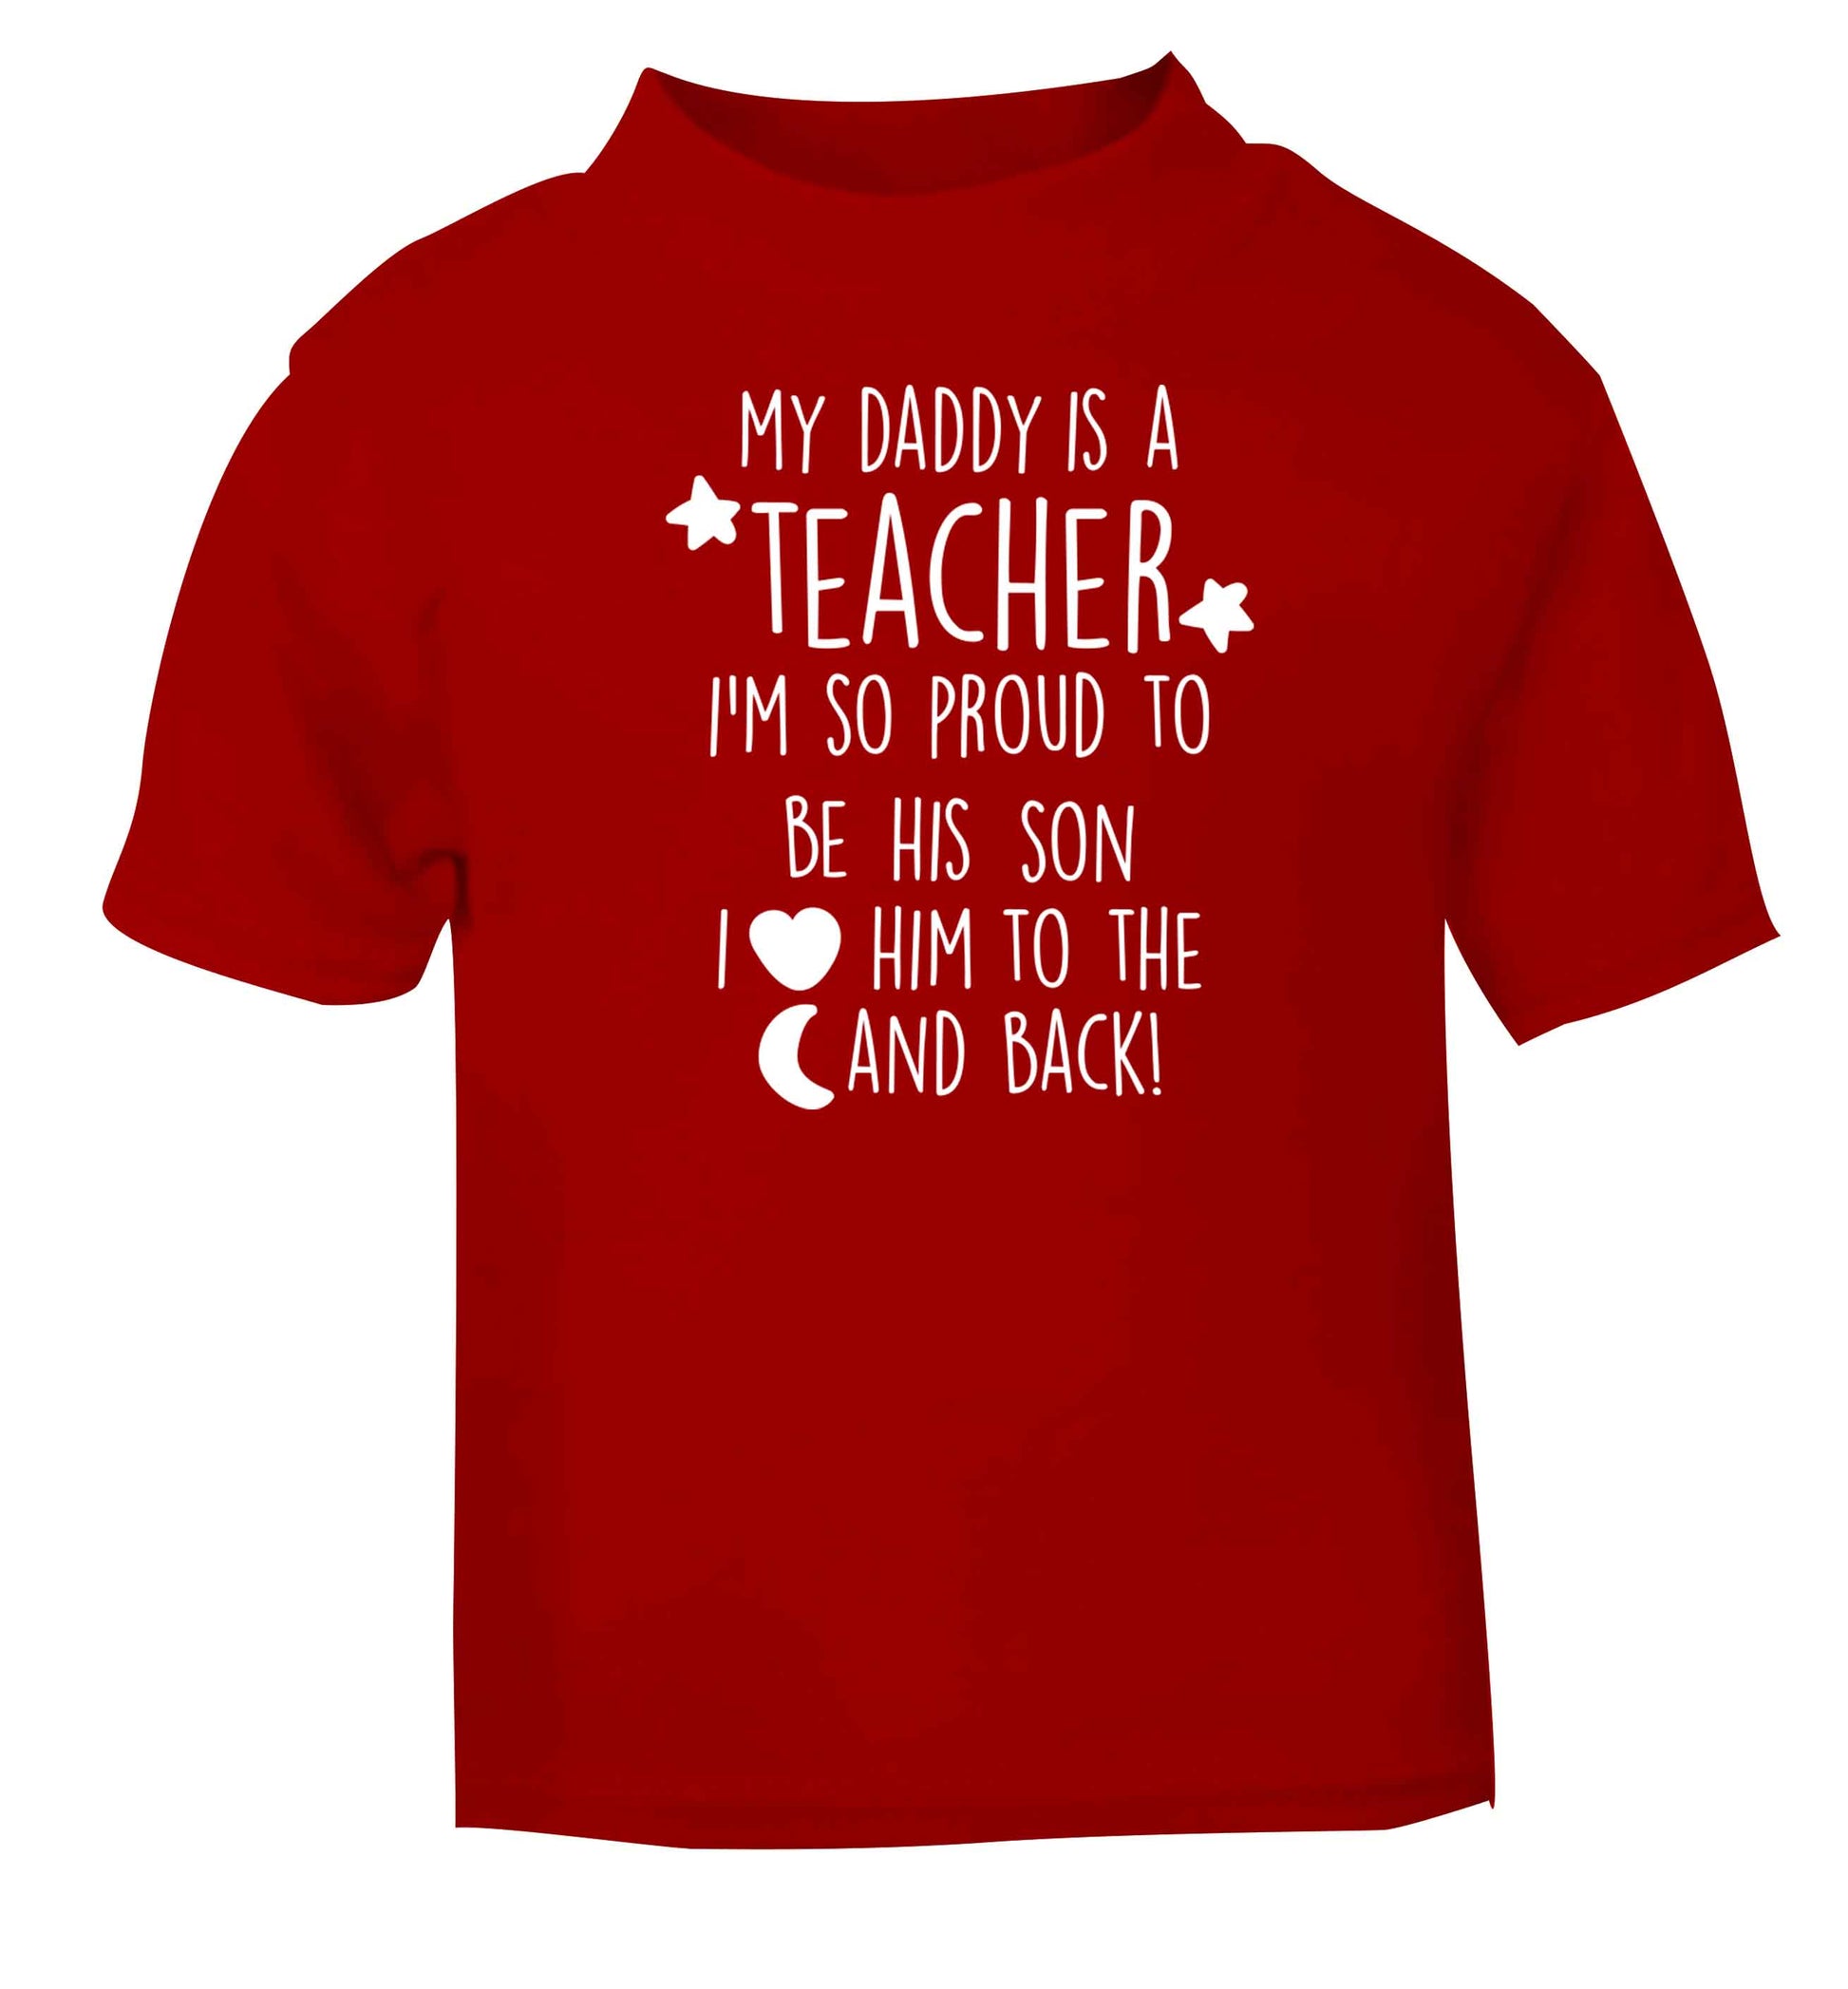 My daddy is a teacher I'm so proud to be his son I love her to the moon and back red baby toddler Tshirt 2 Years